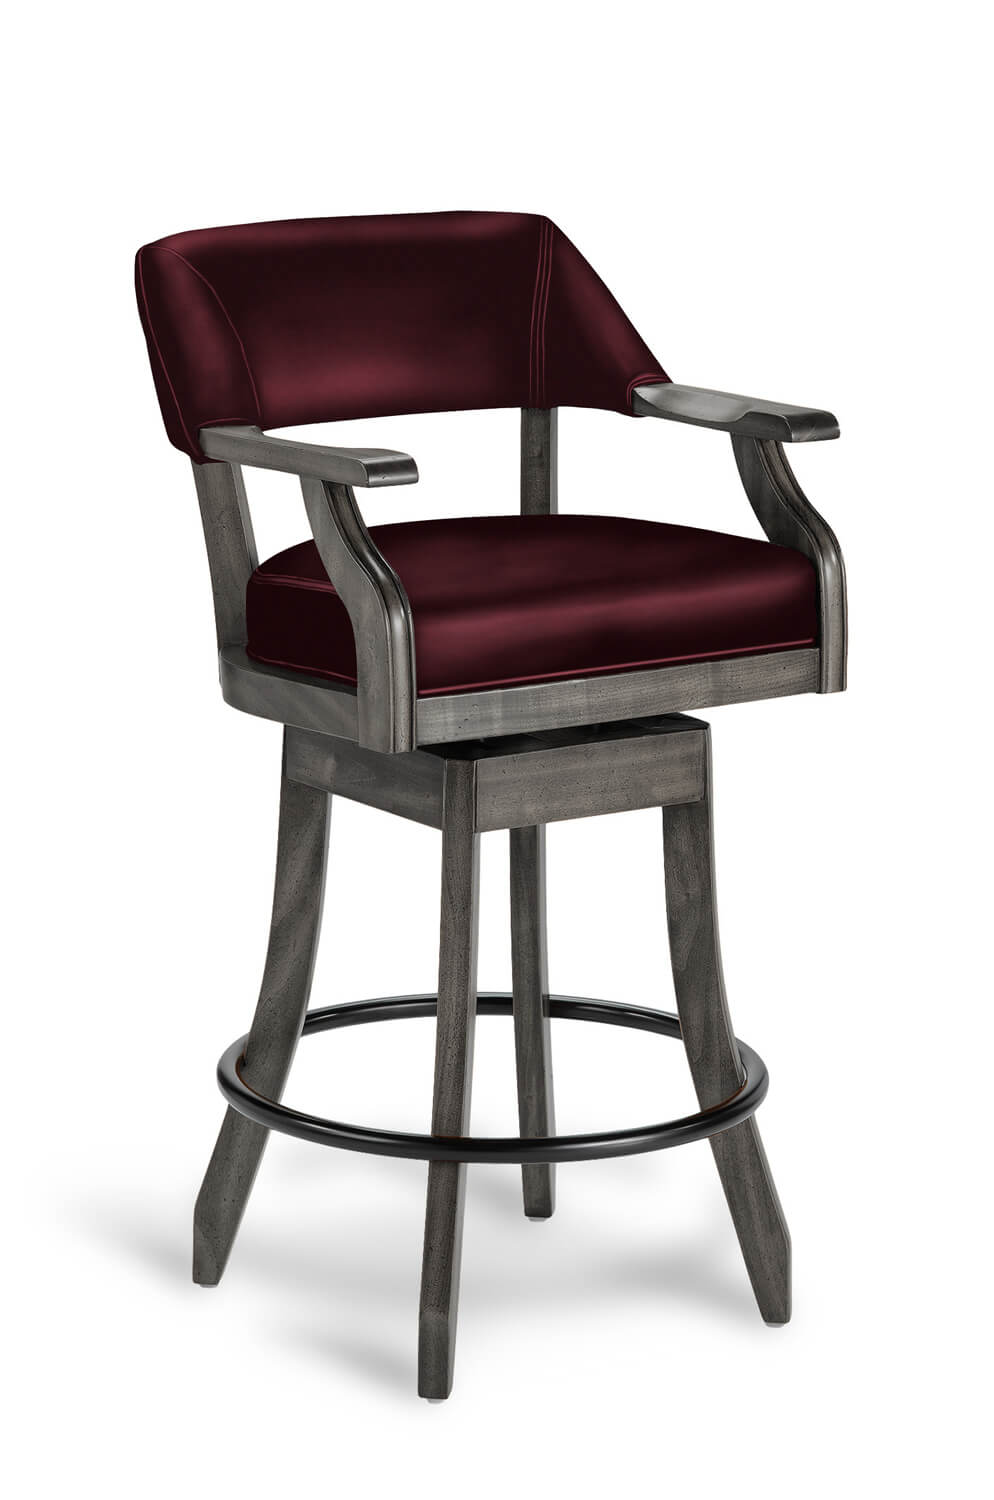 Patriot Maple Wood Swivel Stool, Red Leather Bar Stools With Arms